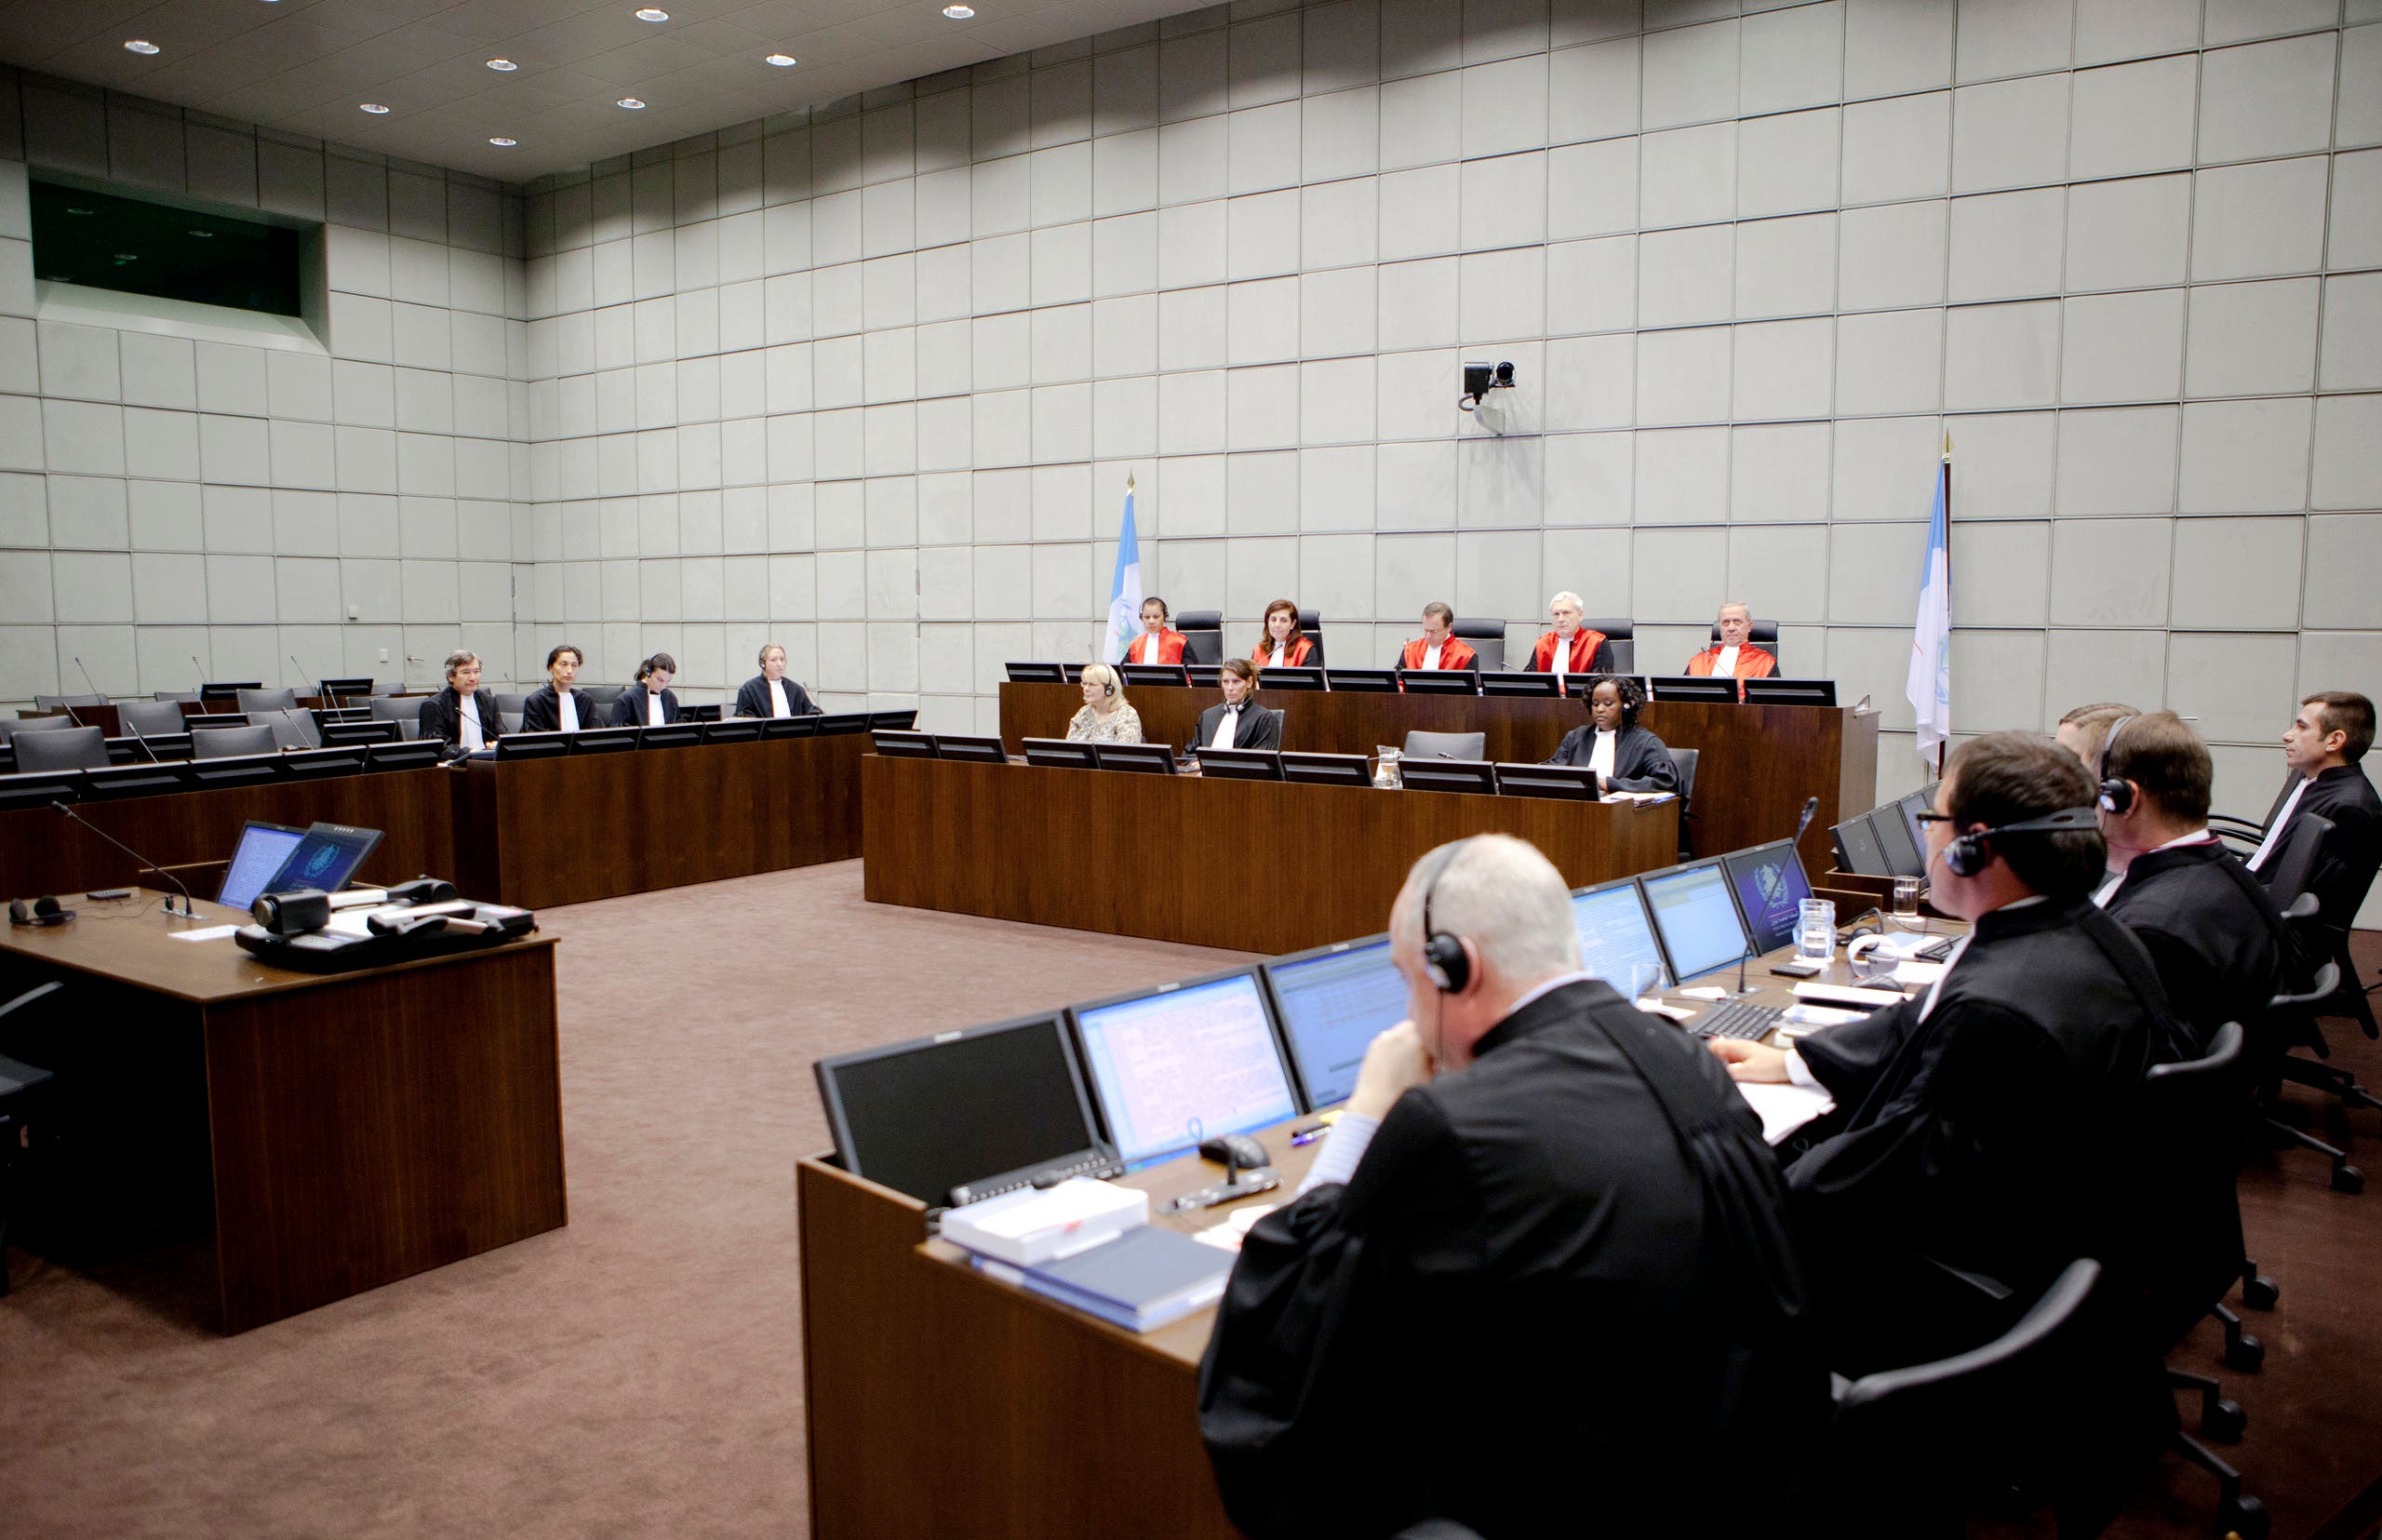 A view of a special session held by the UN-backed Special Tribunal for Lebanon in Leidschendam November 11, 2011. The session convened is to determine whether to stage a trial in-absentia for four Hezbollah members indicted in the political assassination of former Lebanese Prime Minister Rafik Hariri. (File photo: Reuters)